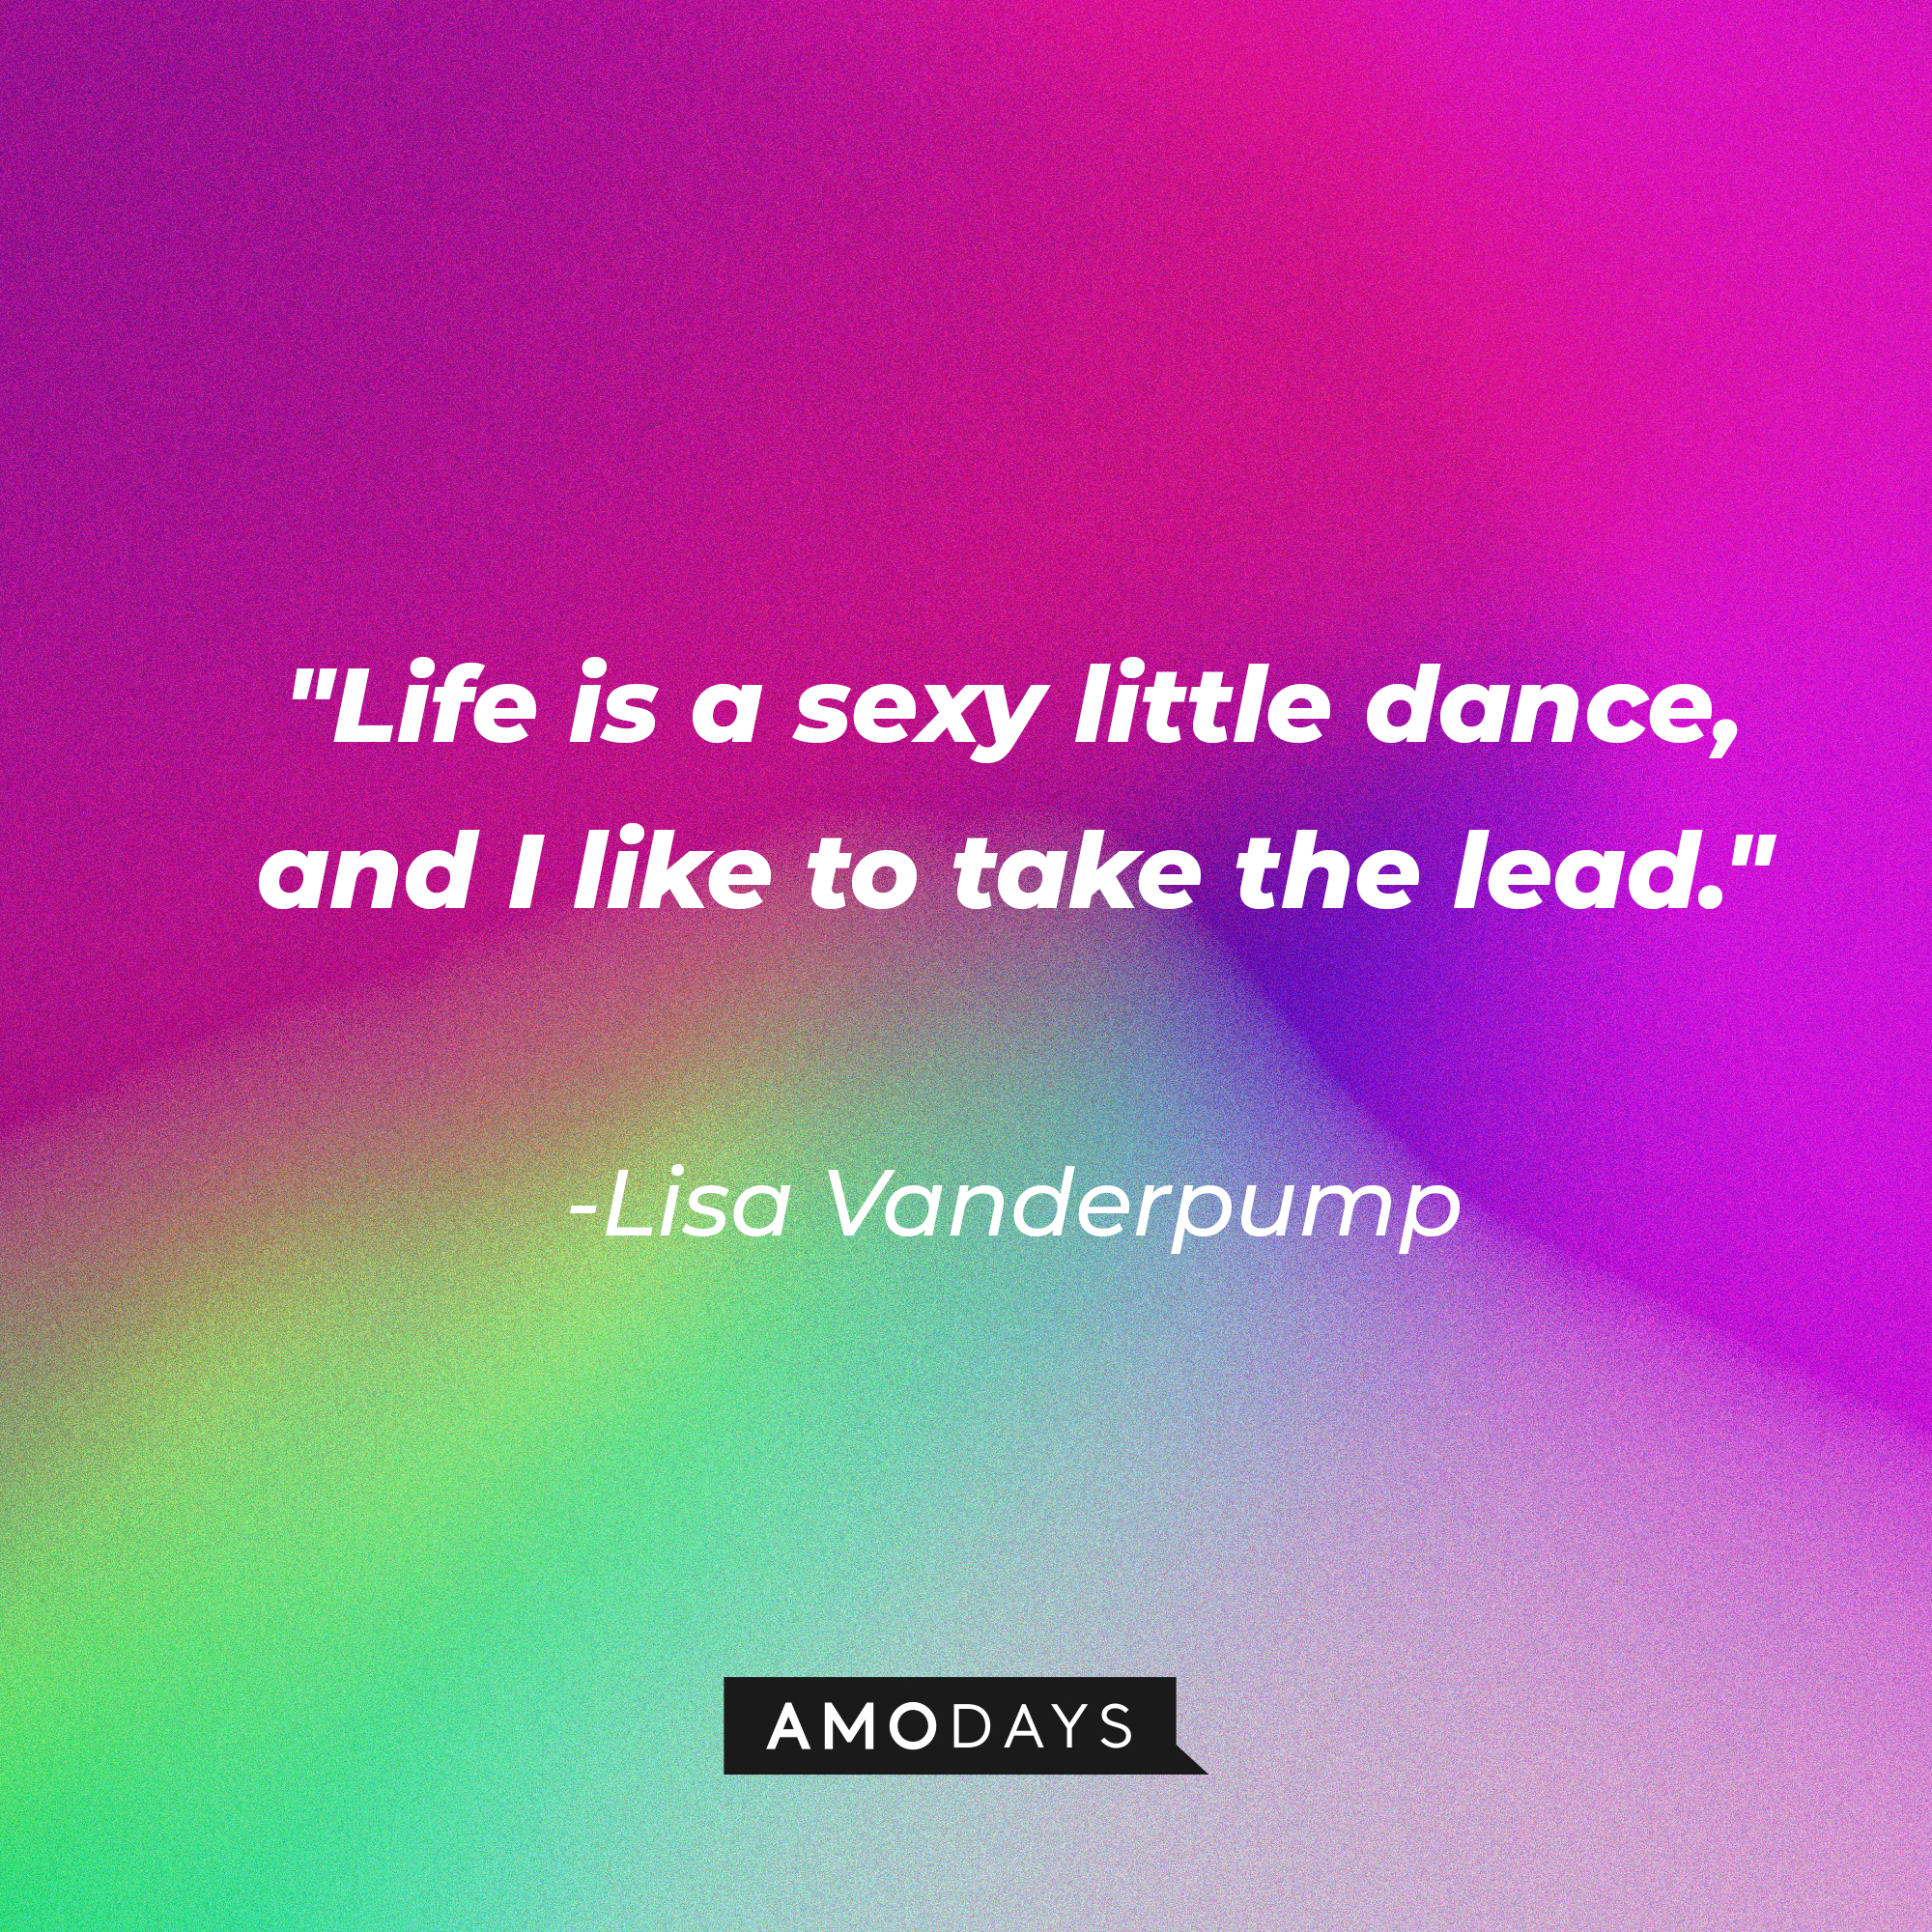 Lisa Vanderpump’s quote: “Life is a sexy little dance, and I like to take the lead.”  | Source: AmoDays